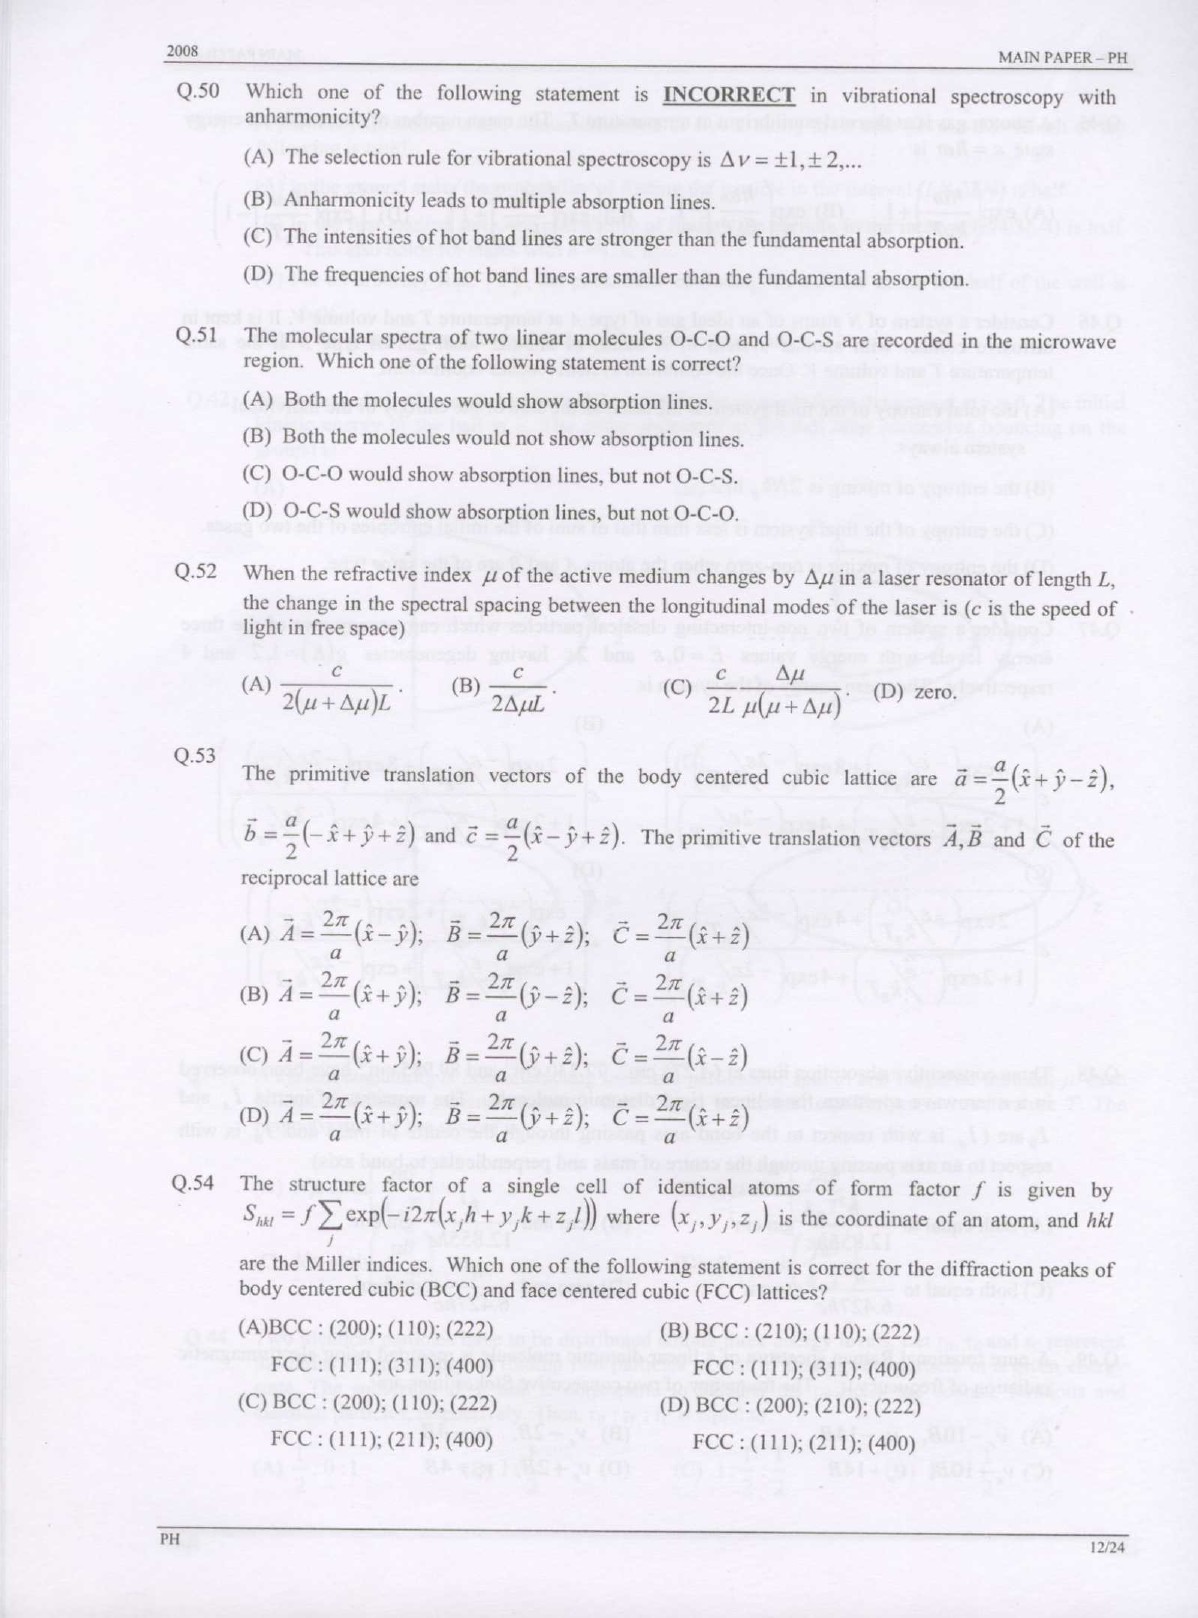 GATE Exam Question Paper 2008 Physics 12